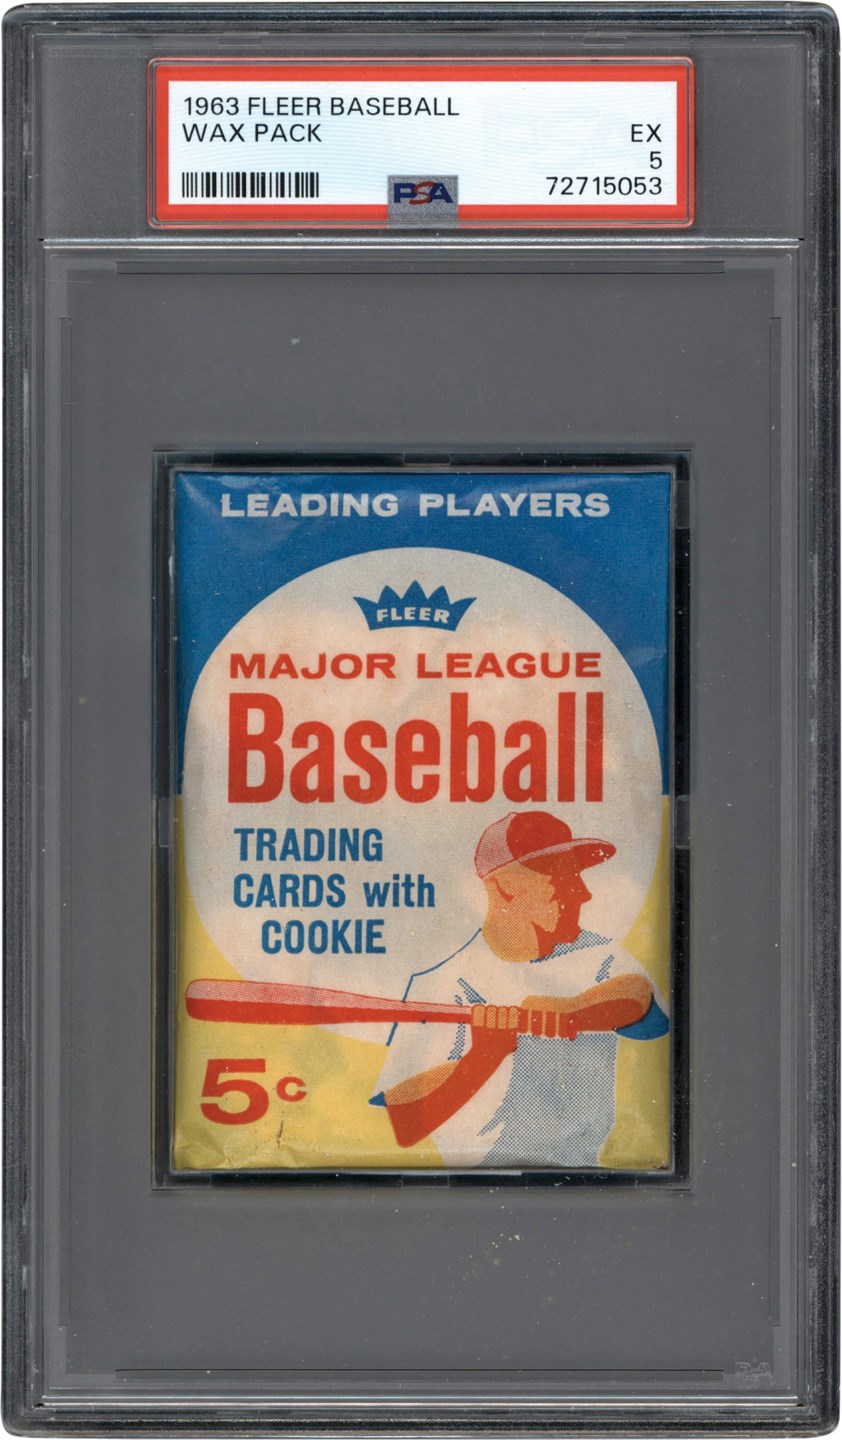 Unopened Boxes, Packs And Cases - 1963 Fleer Baseball Wax Pack PSA EX 5